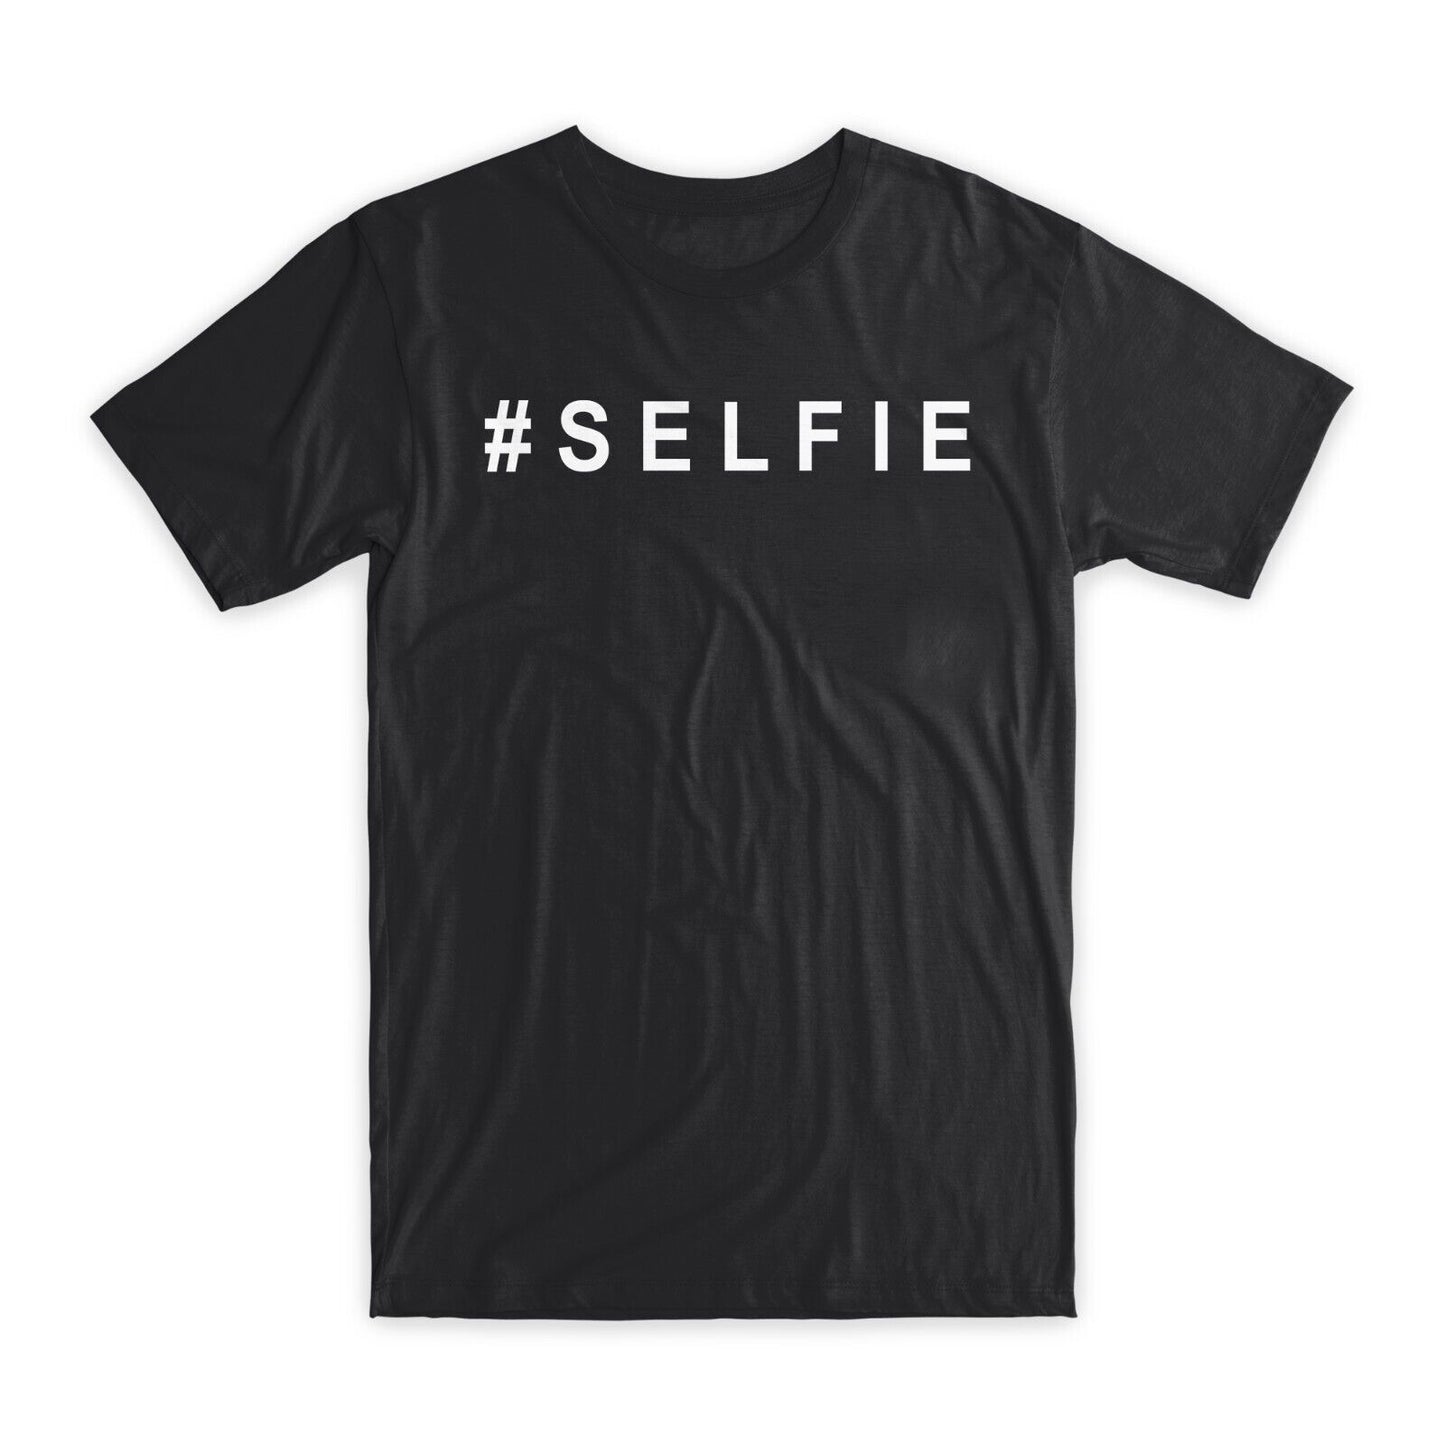 #Selfie Printed T-Shirt Premium Soft Cotton Crew Neck Funny Tee Novelty Gift NEW